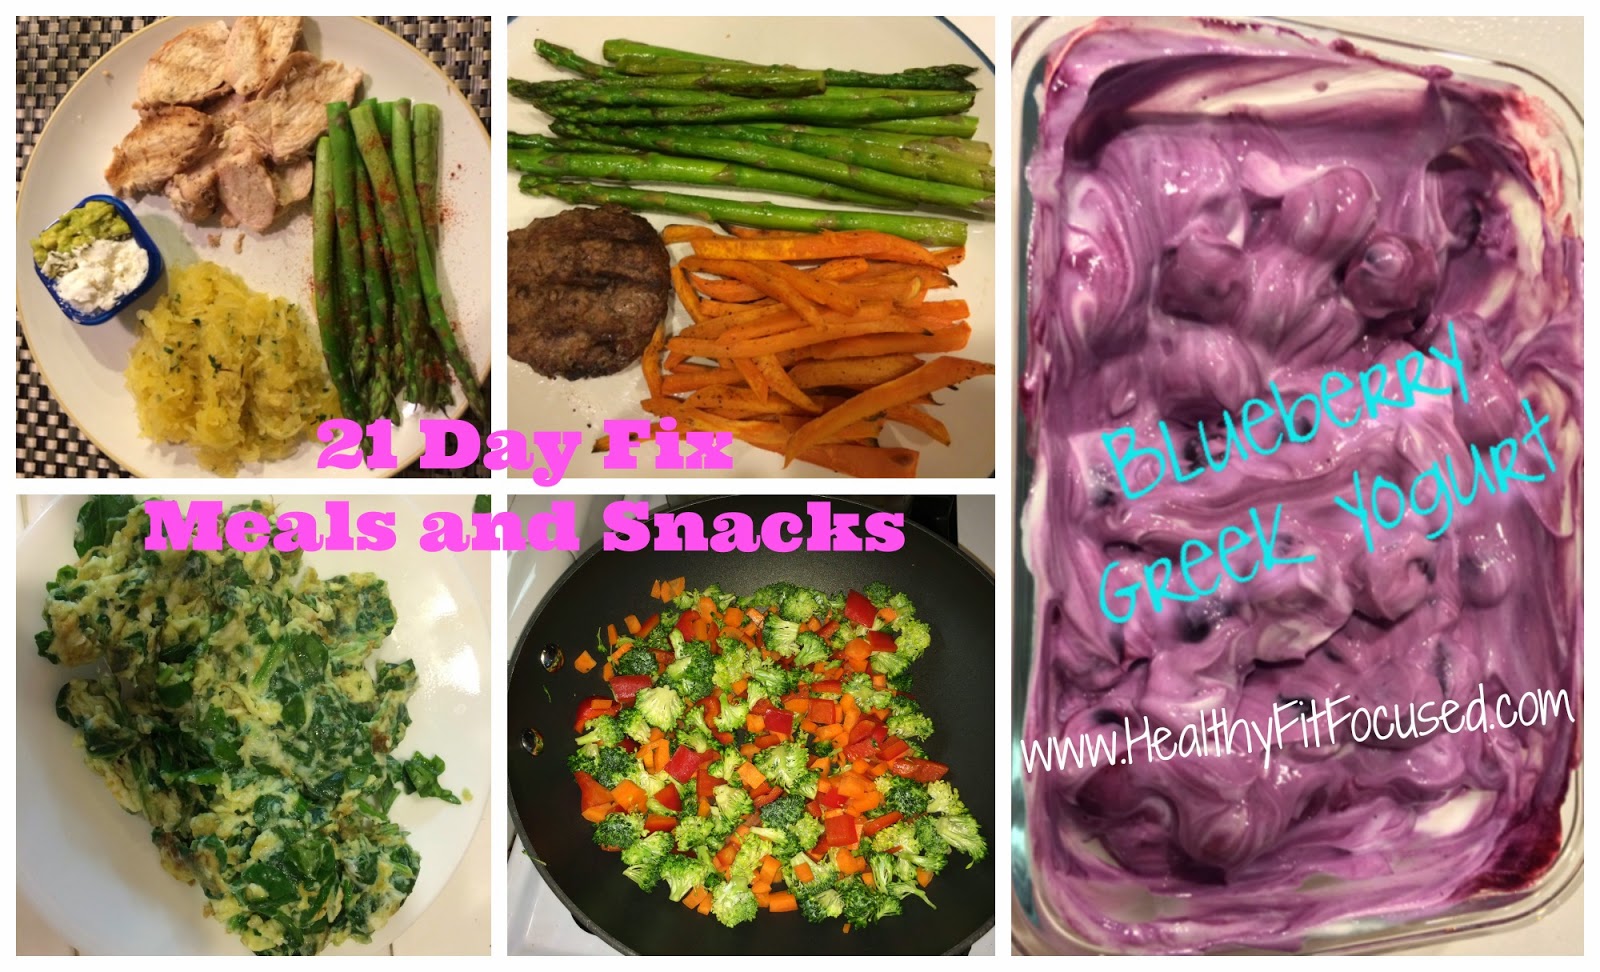 21 Day Fix Meals and Snacks